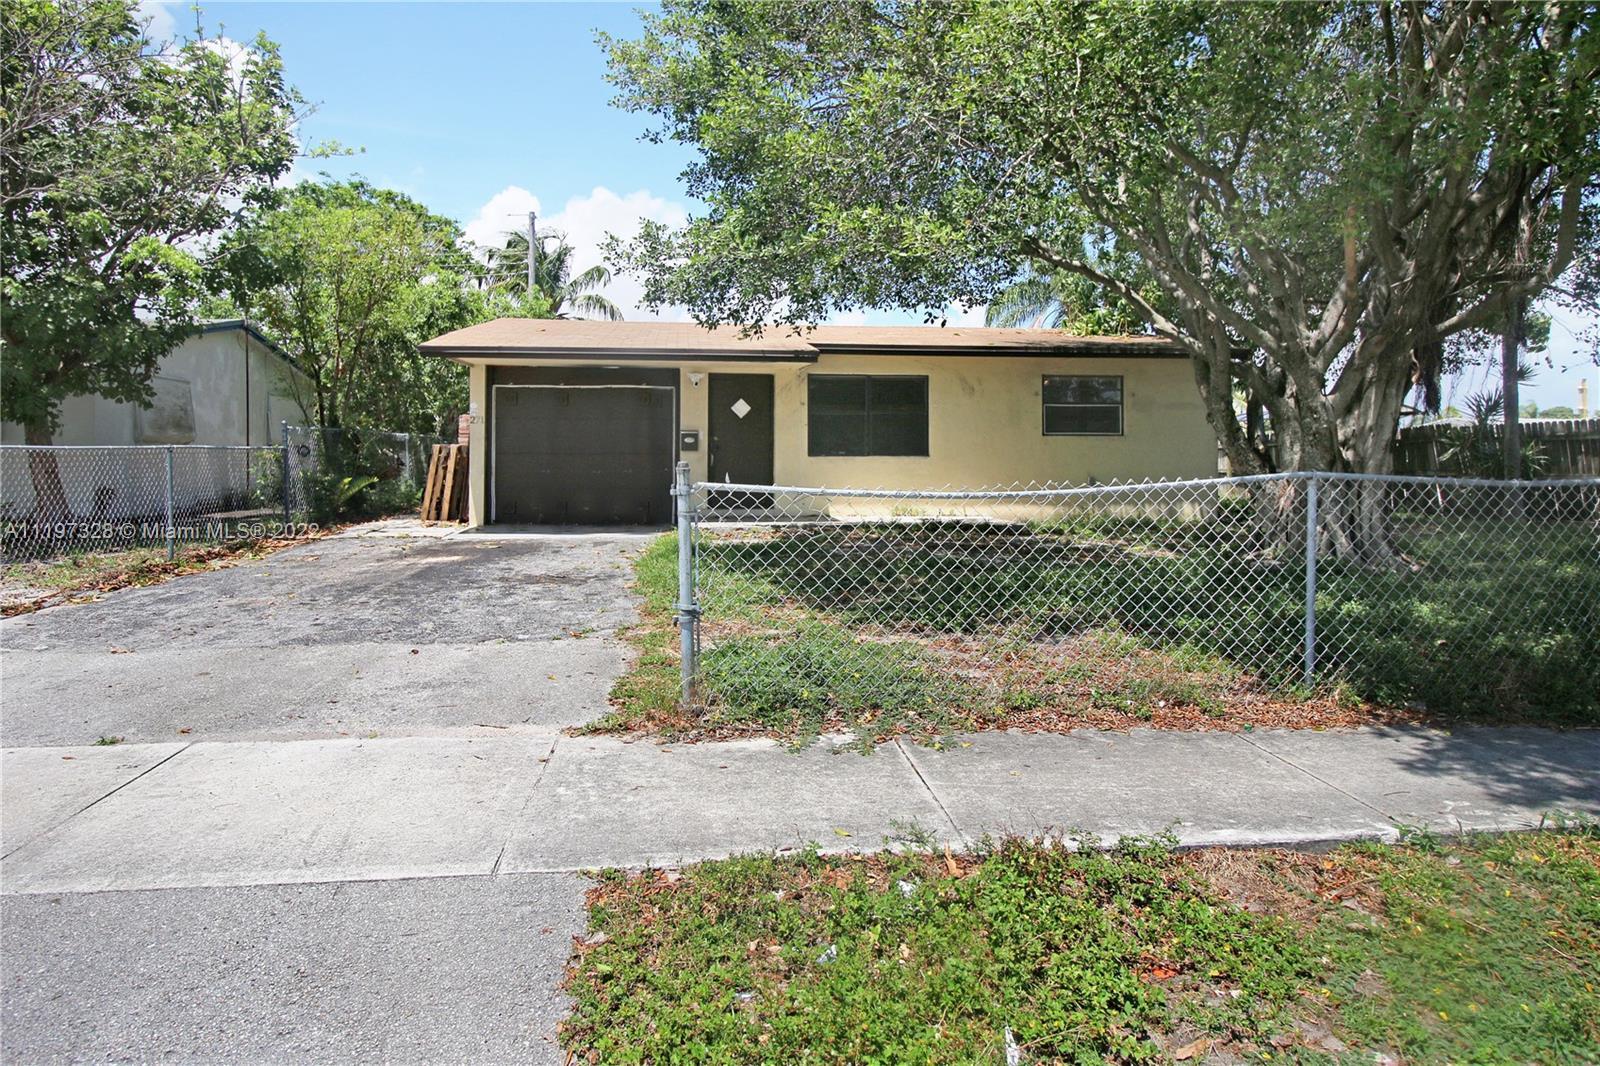 Rare opportunity to purchase a corner lot located in the heart of Pompano Beach, Florida. The proper